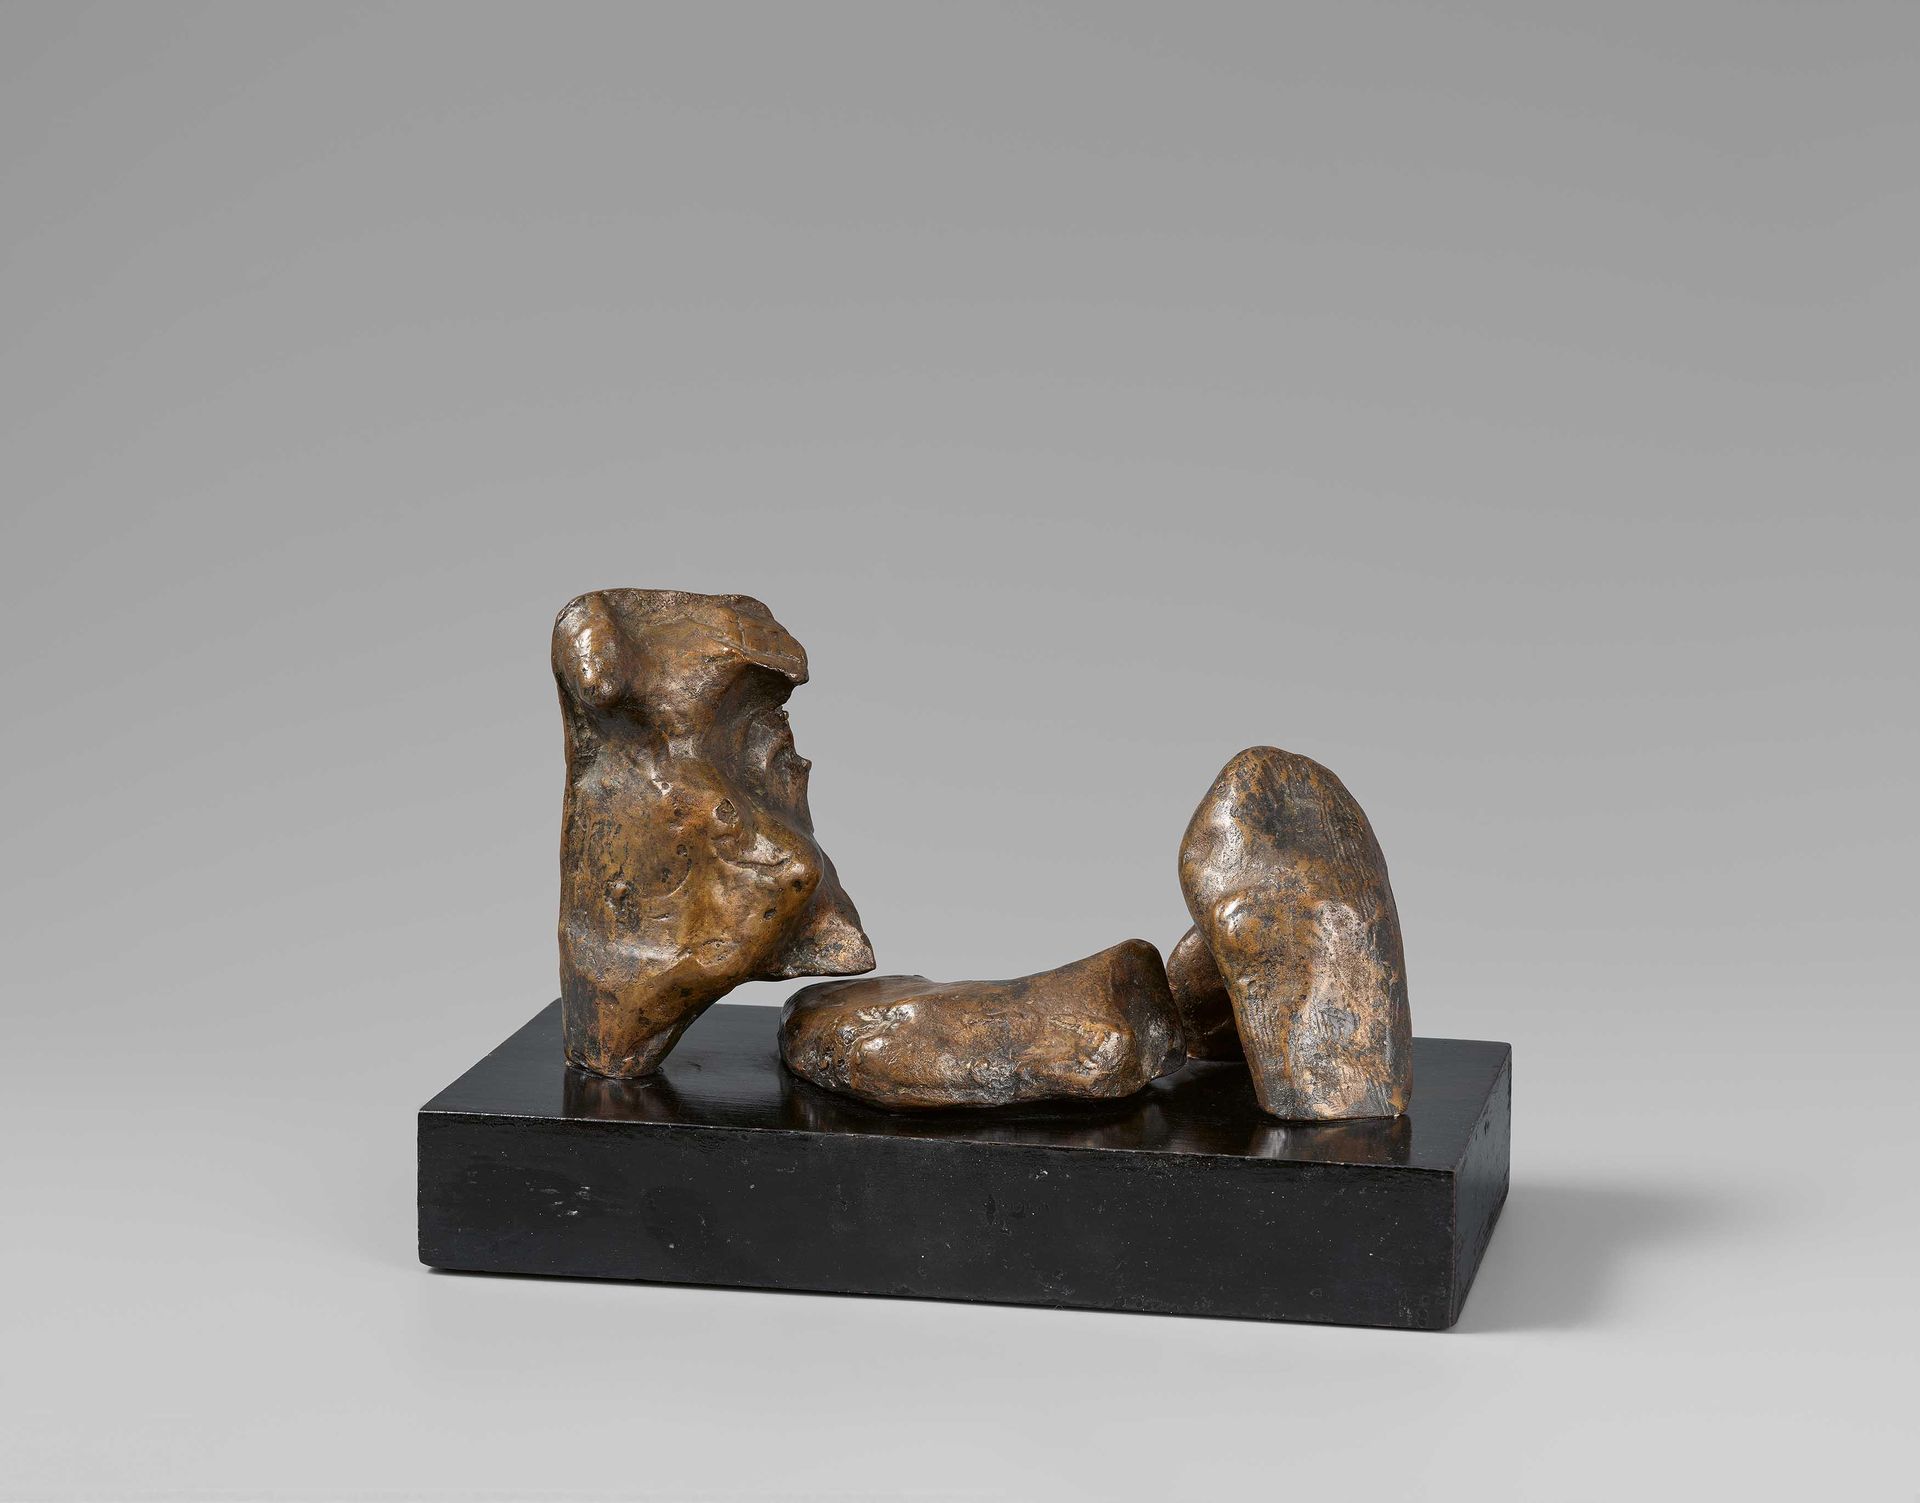 Henry Moore MOORE, HENRY
1898 Castleford/Yorkshire - 1986 Much Hadham

Titel: Dr&hellip;